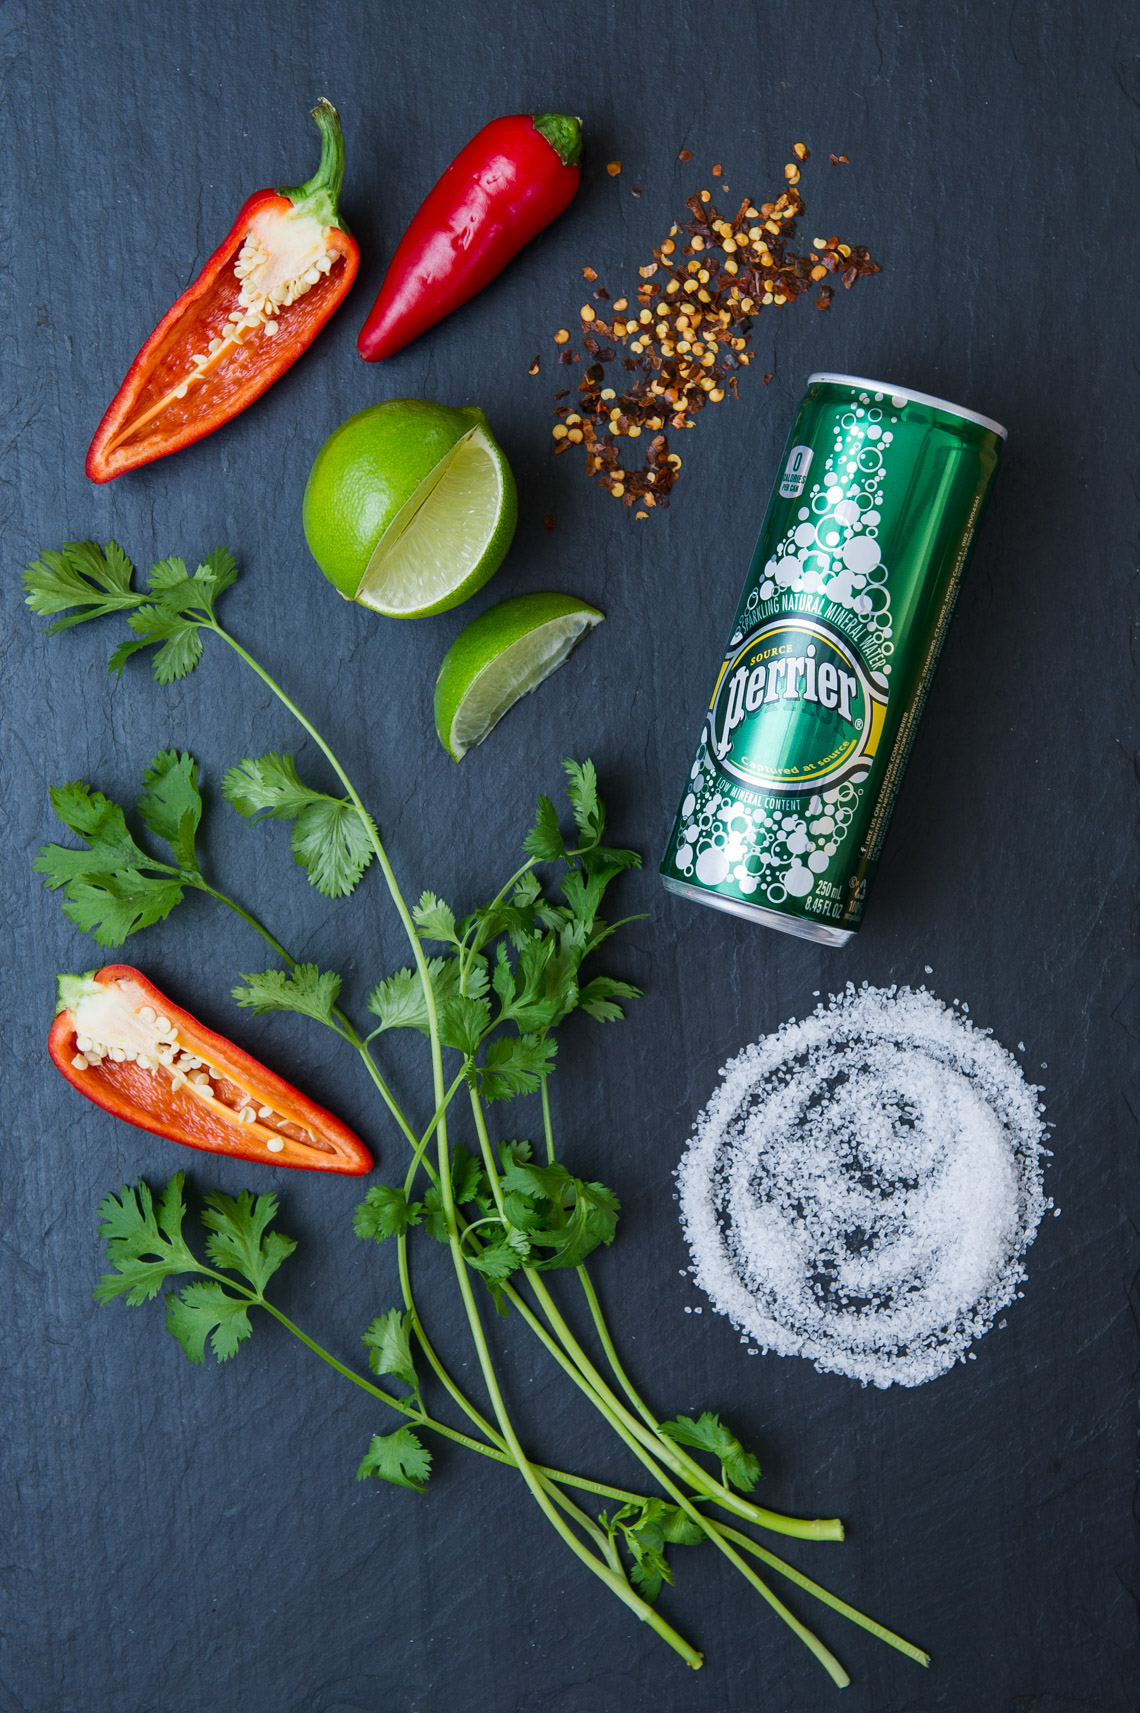 Photo by Morgan Ione Yeager, NYC Food photographer, Perrier USA, sparkling mineral water, cocktail, recipe